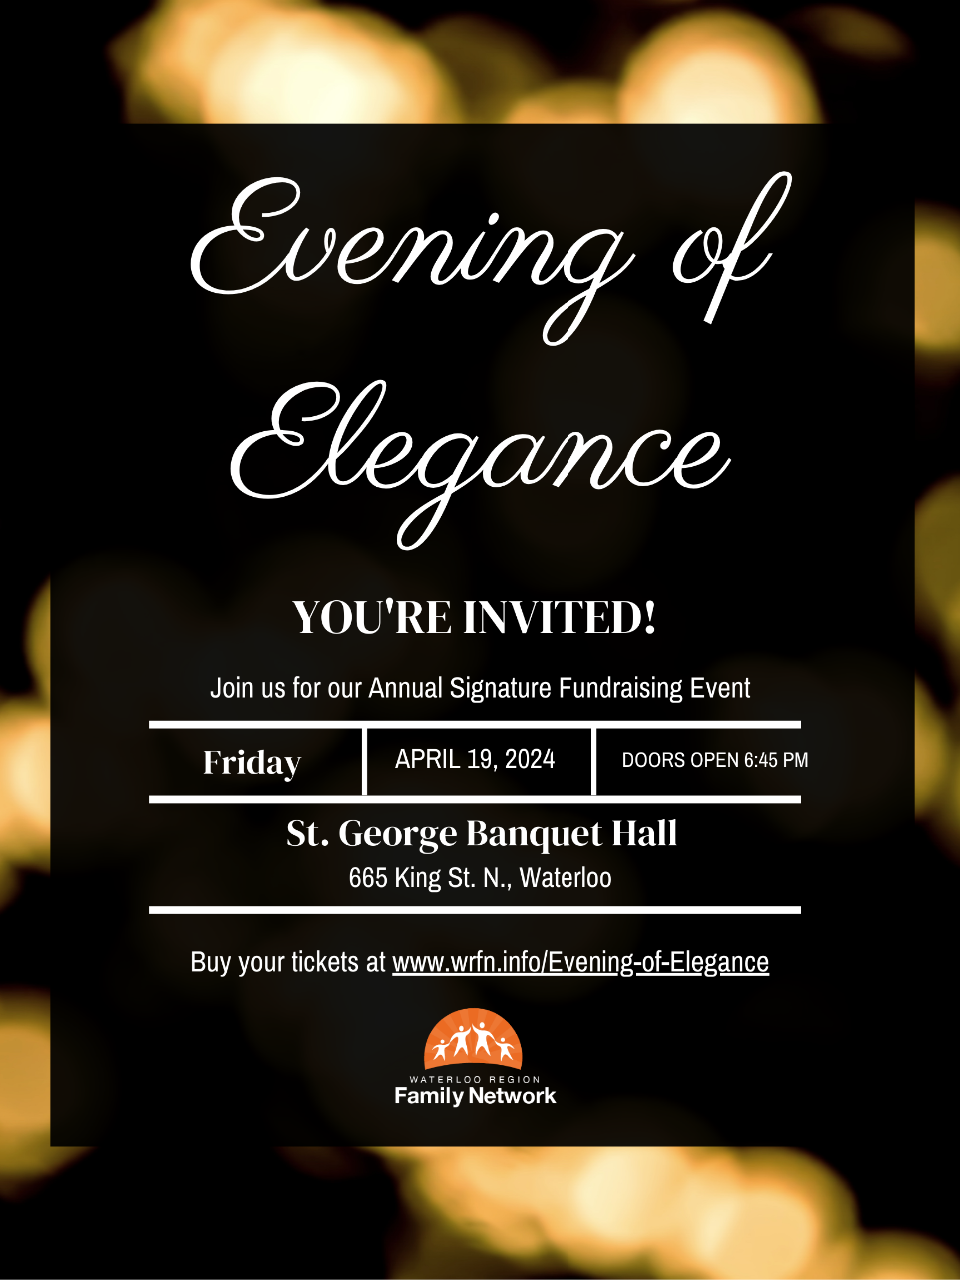 Evening of Elegance Flyer with black and gold design.